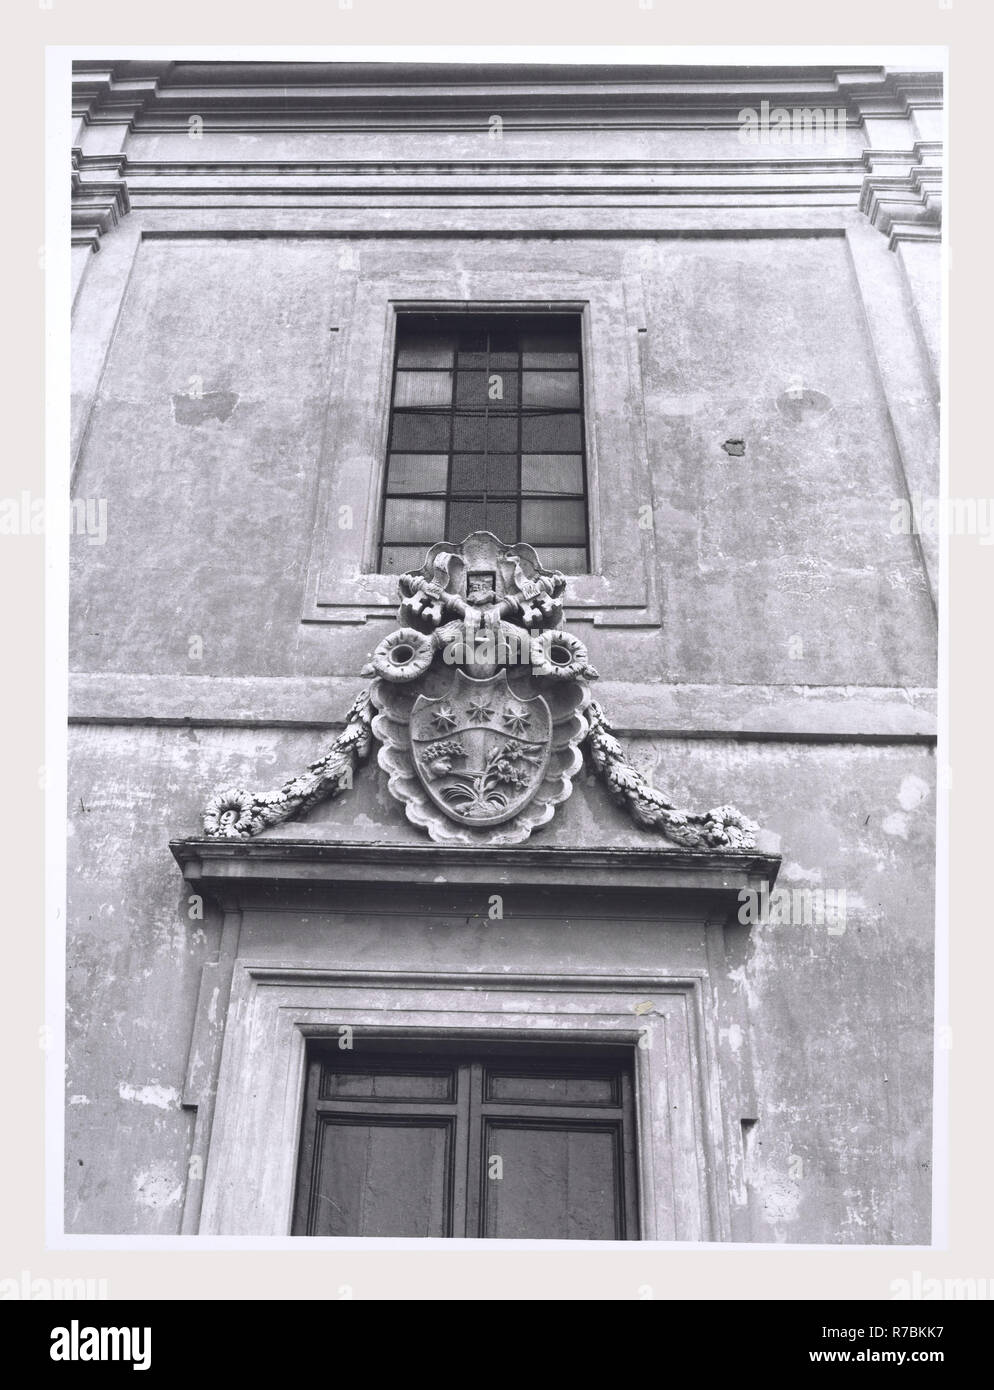 Lazio Roma Palidoro SS. Filippo e Giacomo Apostoli, this is my Italy, the italian country of visual history, Post-medieval Architecture, architectural sculpture. Views of facade of parrocchiale, with coat-of-arms over the main portal. Stock Photo